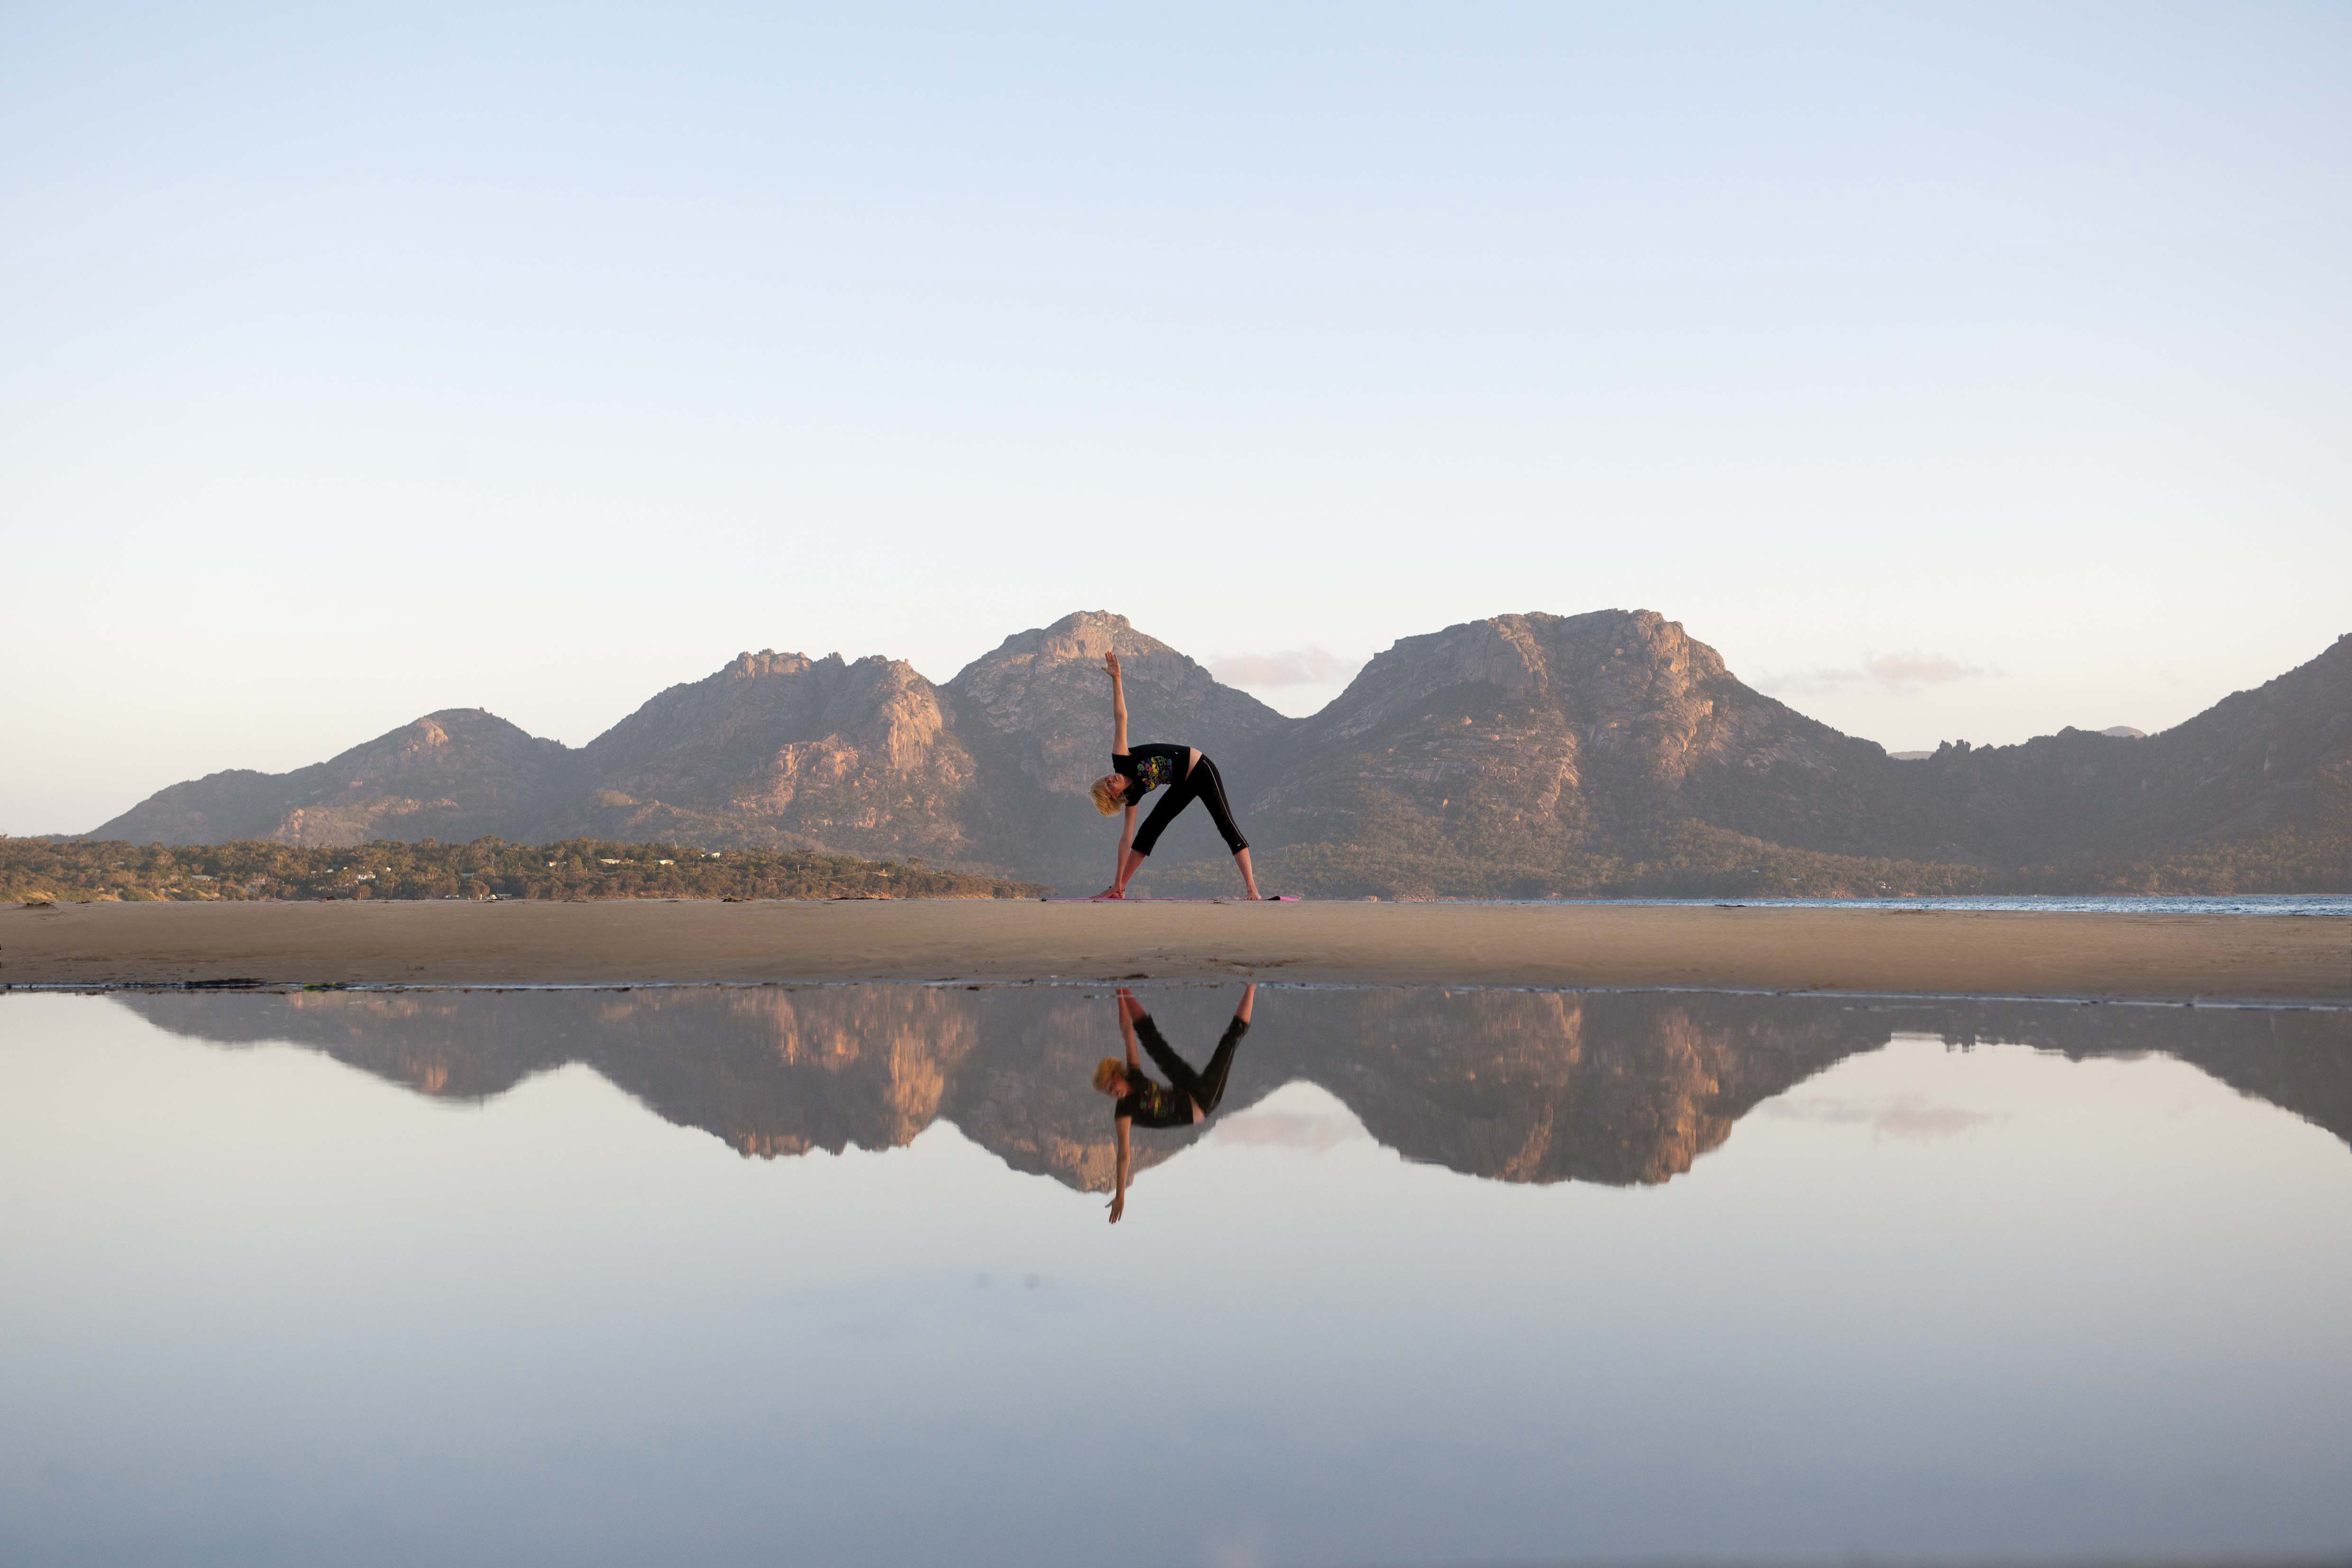 Saffire-Freycinet_Yoga-on-Muir's-Beach - Click to view larger version